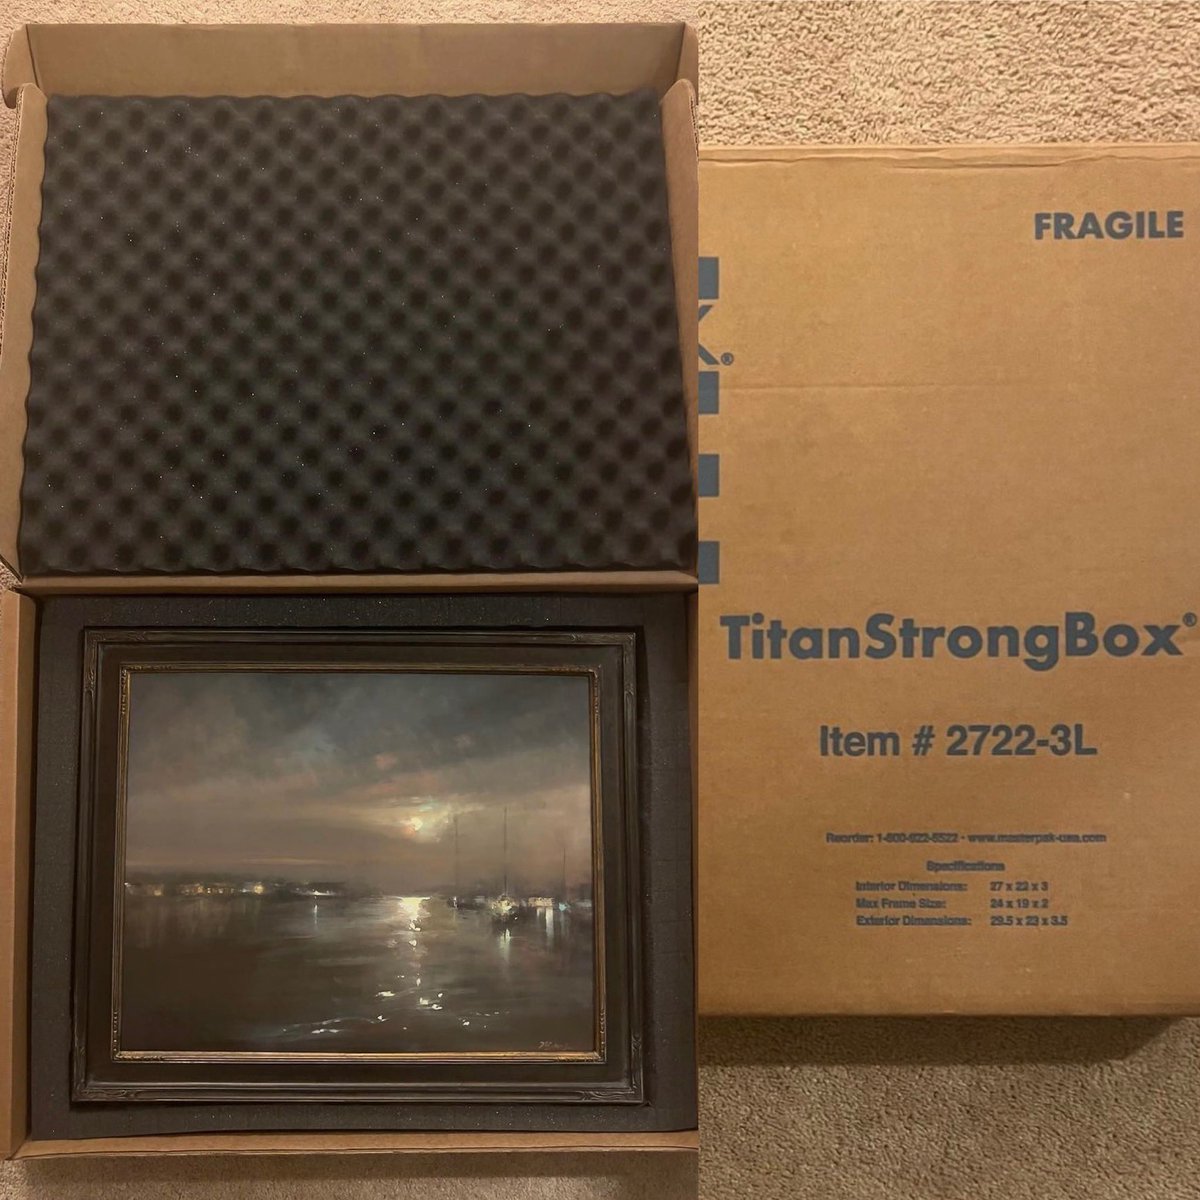 Titan Strong Box love from our followers on Instagram.👍🏻 #masterpak #artshippingbox #titanstrongbox #reuseableboxes #shippingboxes #artworld #protectiveboxes #artcollectors #artists #museums #galleries #artshippingcrate #fineart #artpackaging #artintransit